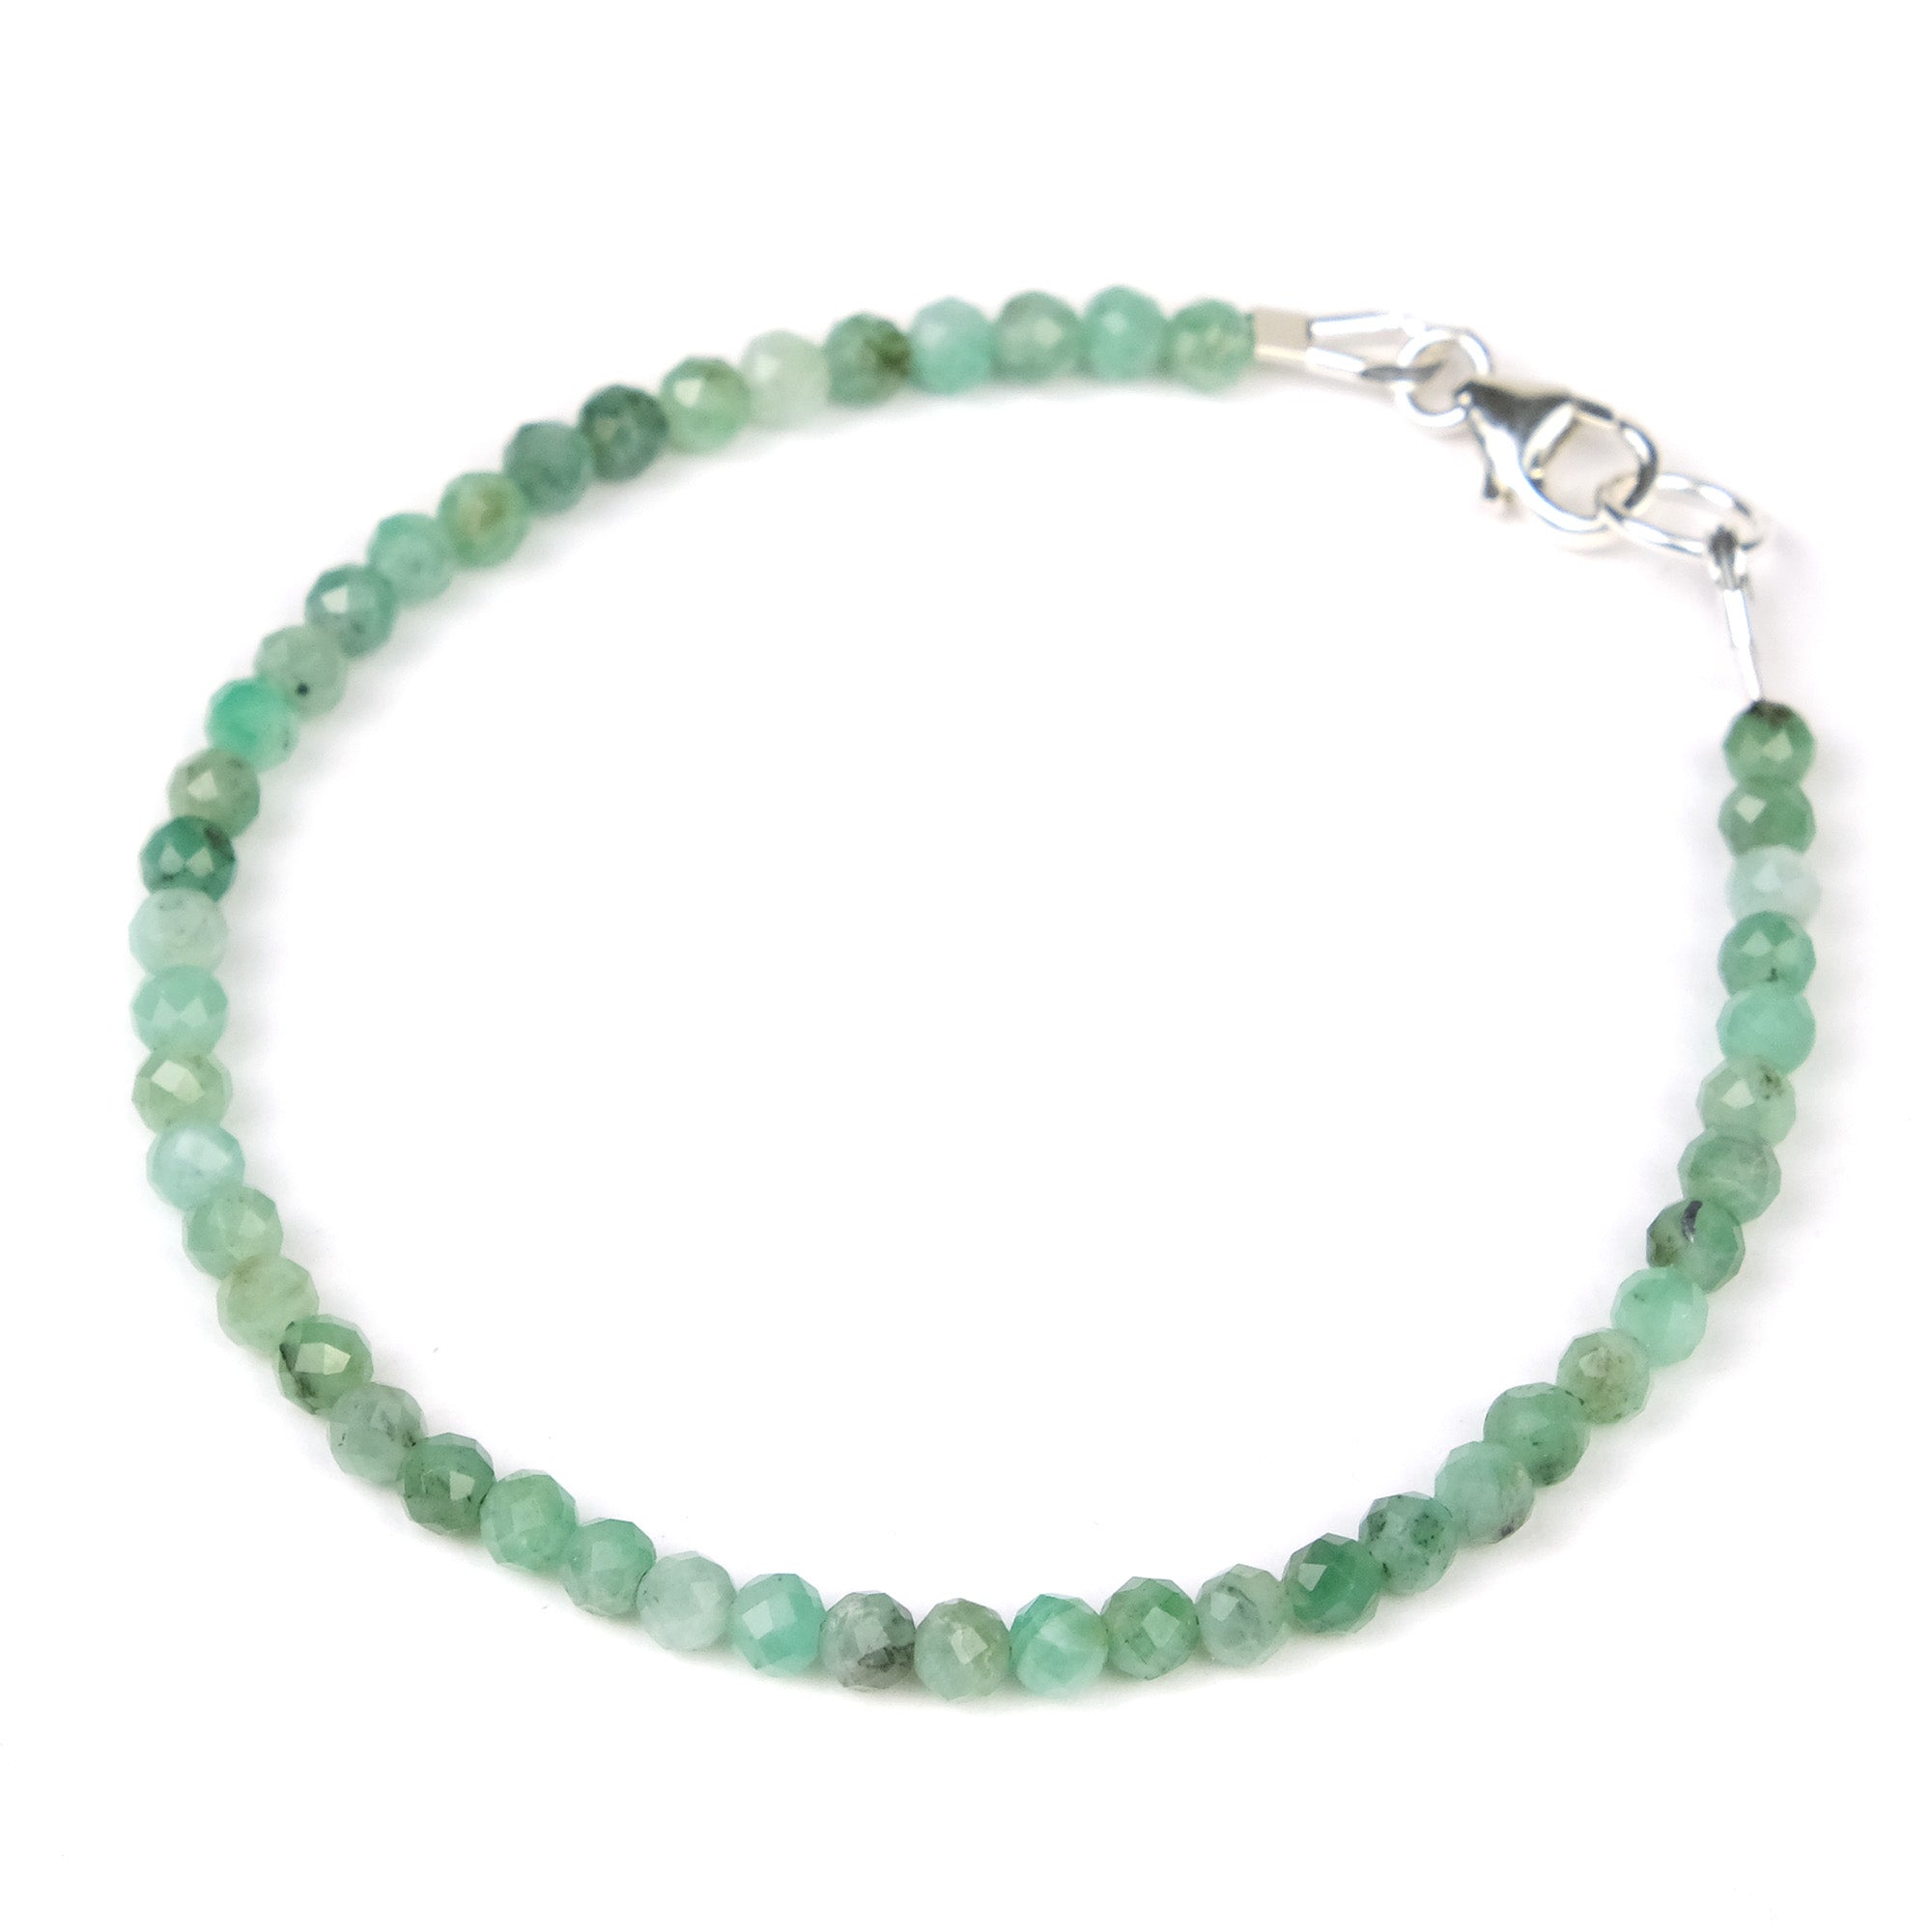 Long Leather Bracelet Featuring Genuine Emerald Faceted Stones and Tahitian Pearl Clasp to Wrap Three Time Around The Wrist.